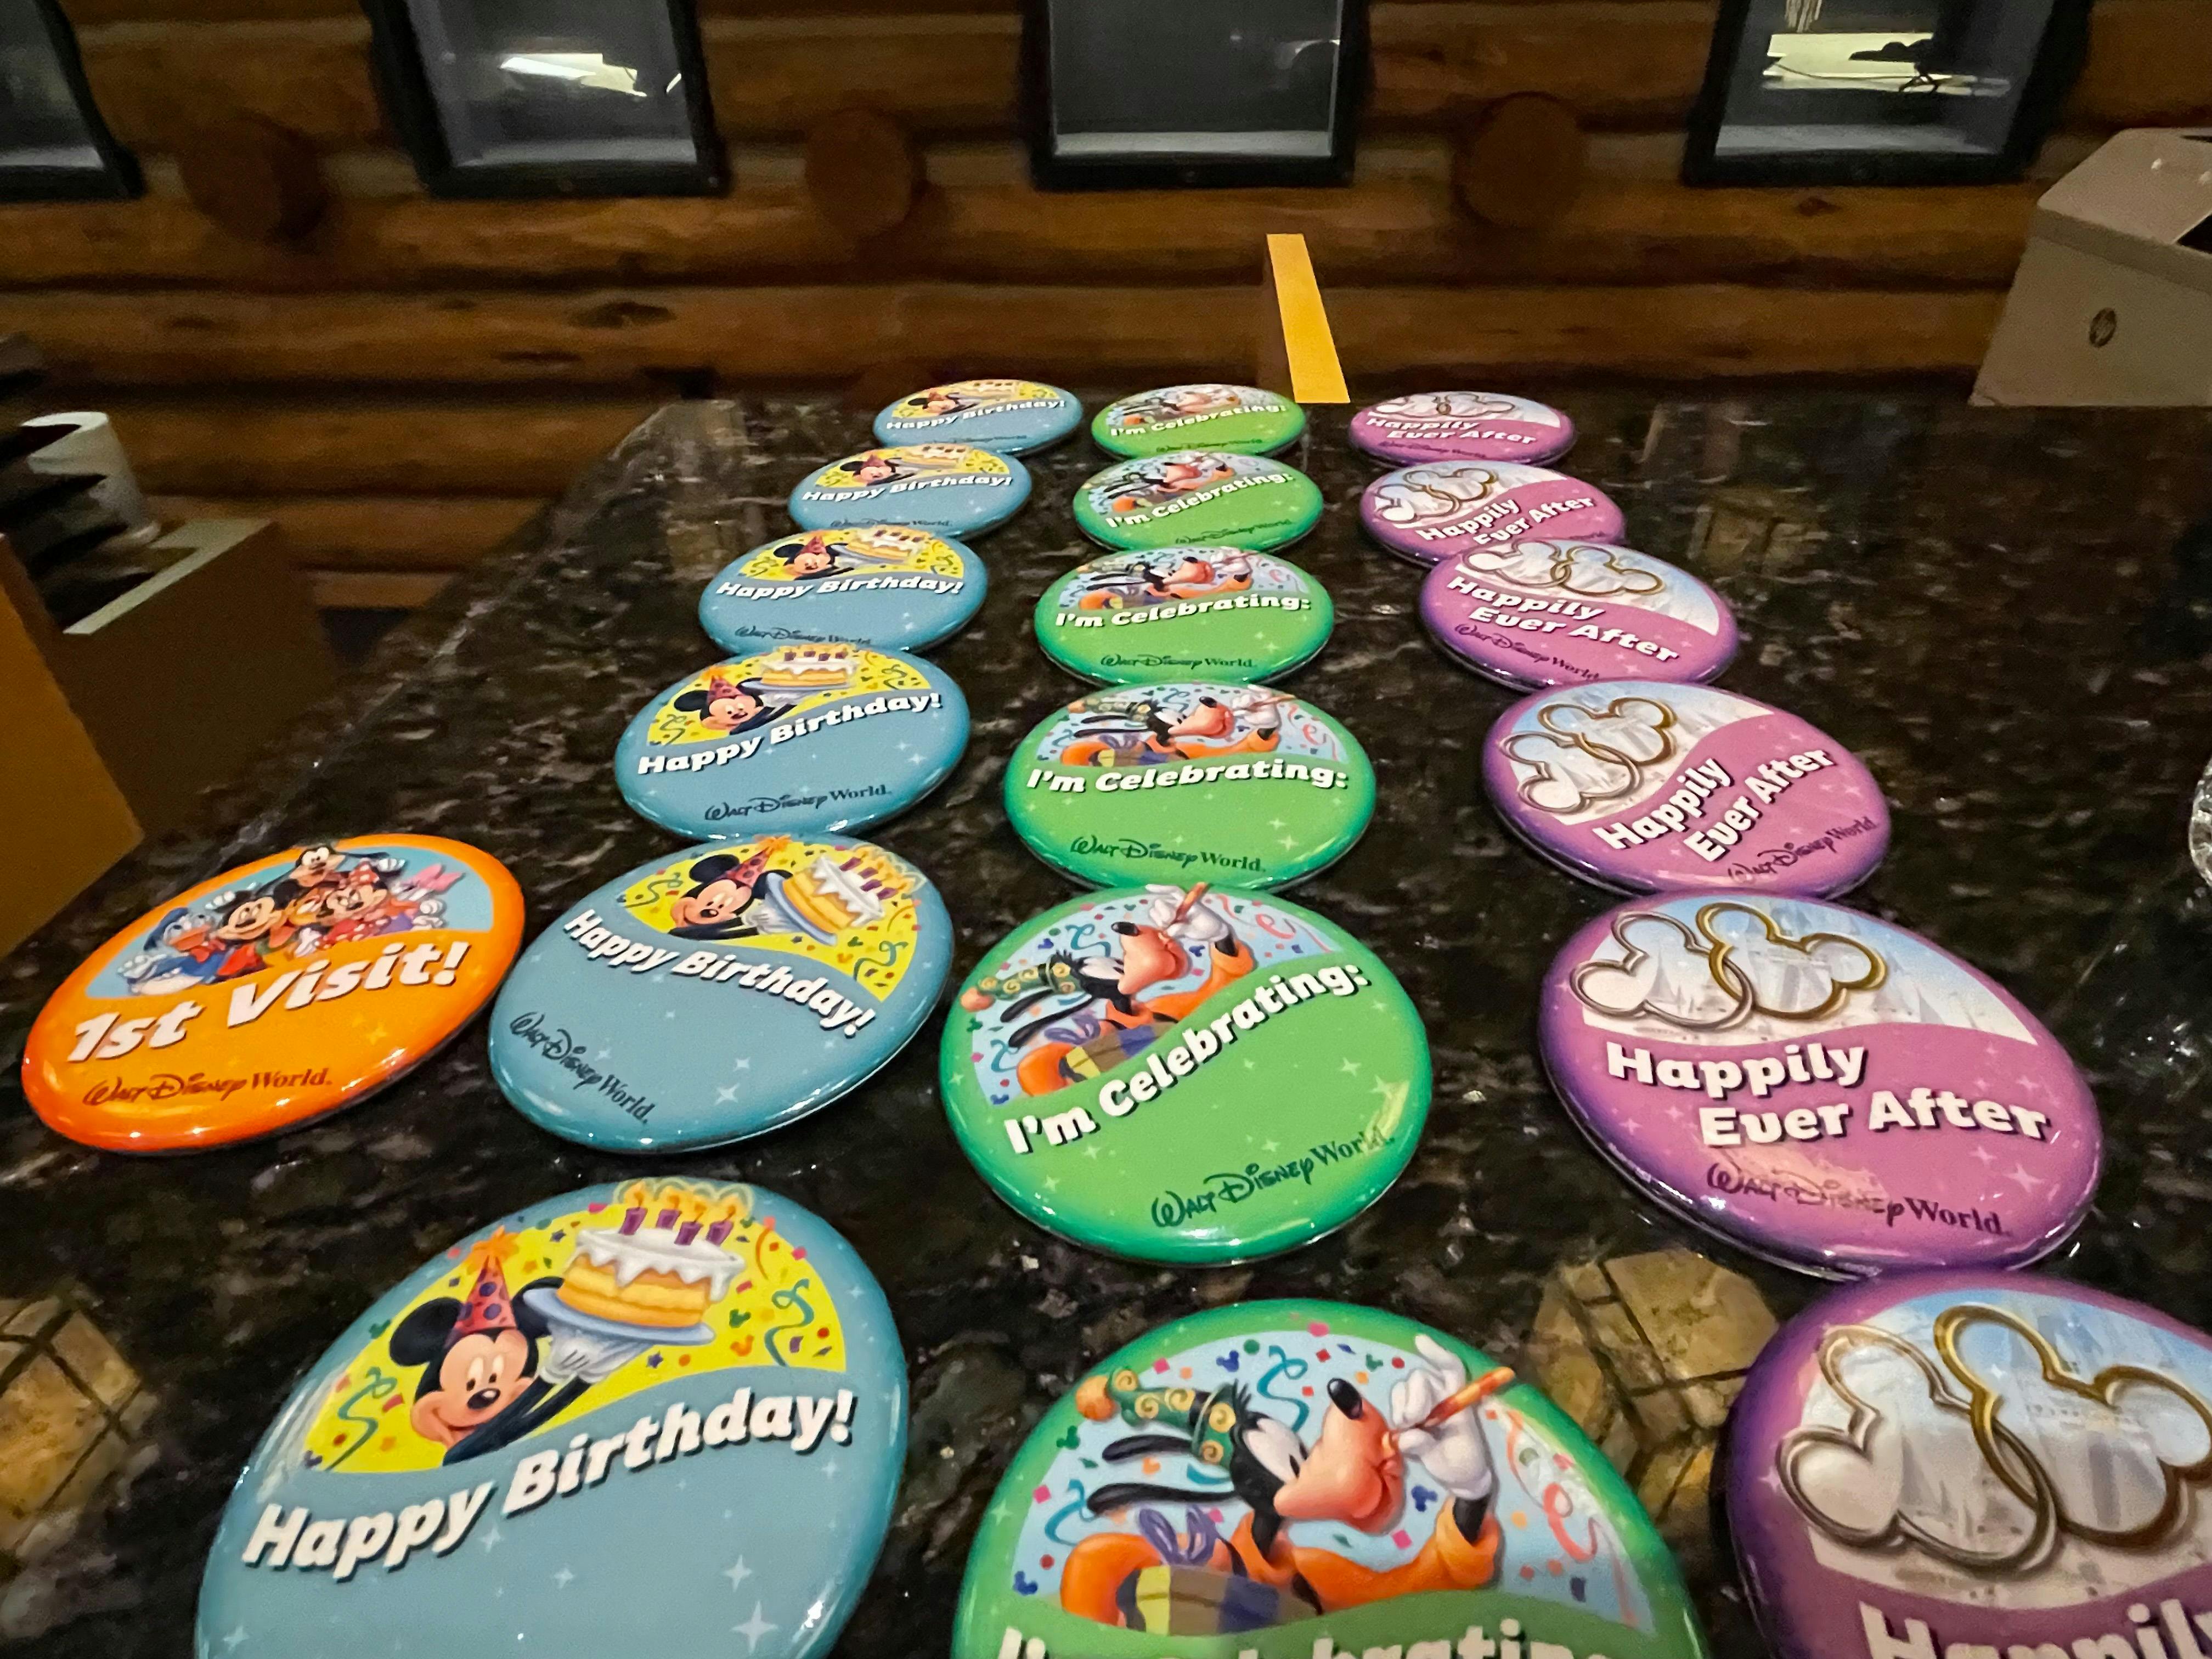 Several different kinds of Disney celebration buttons sitting on a counter, including 1st Visit, Happy Birthday, I'm Celebrating, and Happily Ever After.